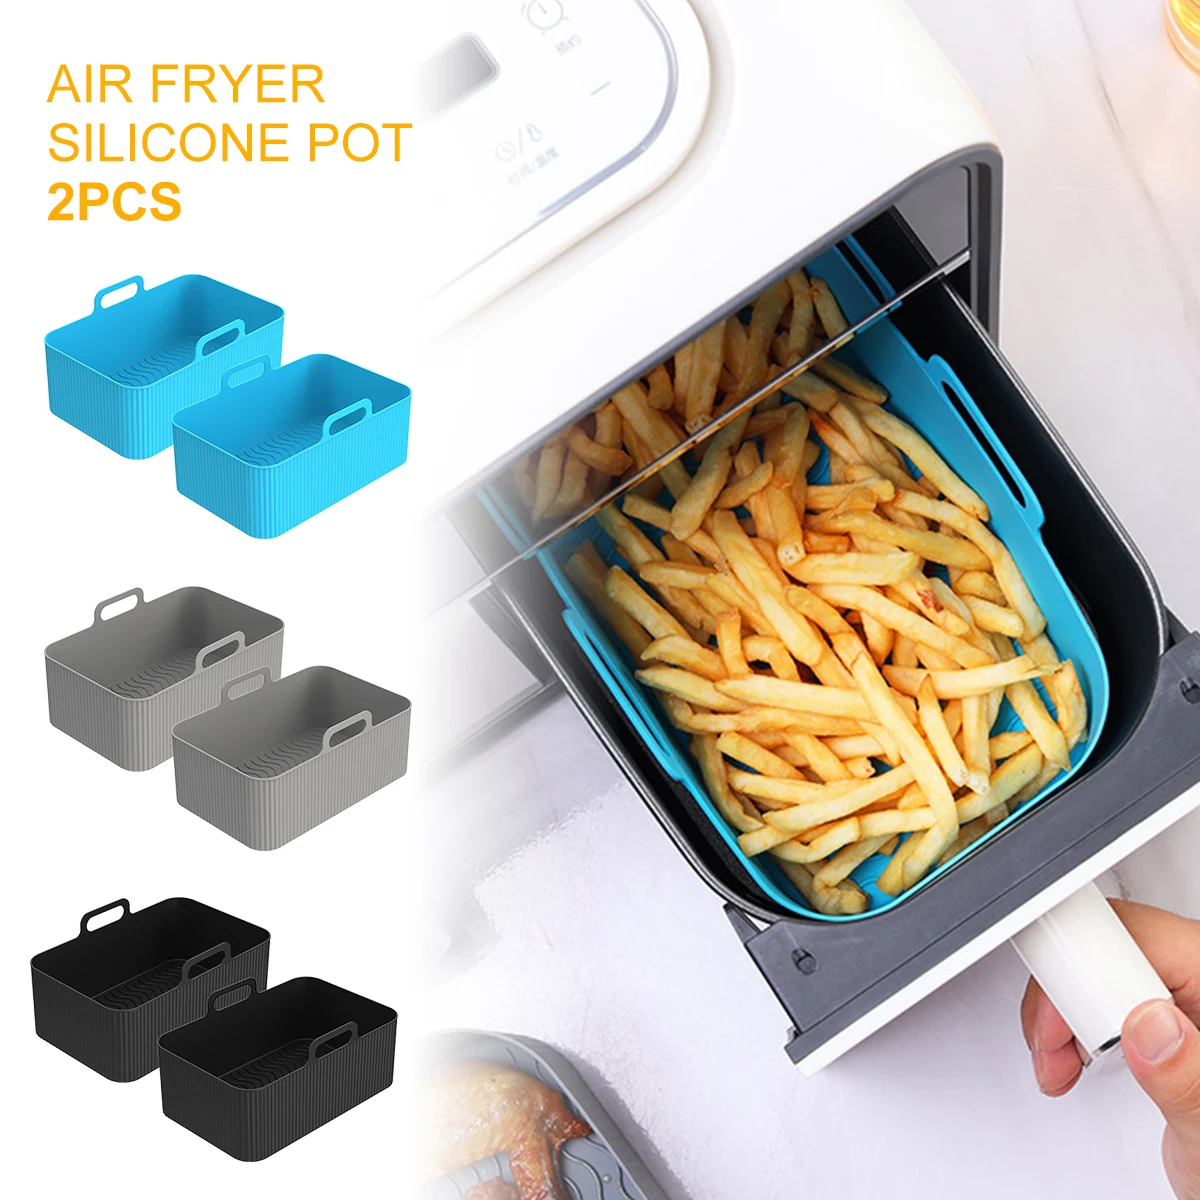 https://ae01.alicdn.com/kf/S4841f7353d90475c994029cecce3e60f5/2Pcs-Air-Fryer-Silicone-Pot-Rectangle-Silicone-Liners-For-Air-Fryer-Baking-Heat-Resistant-Non-Stick.jpg